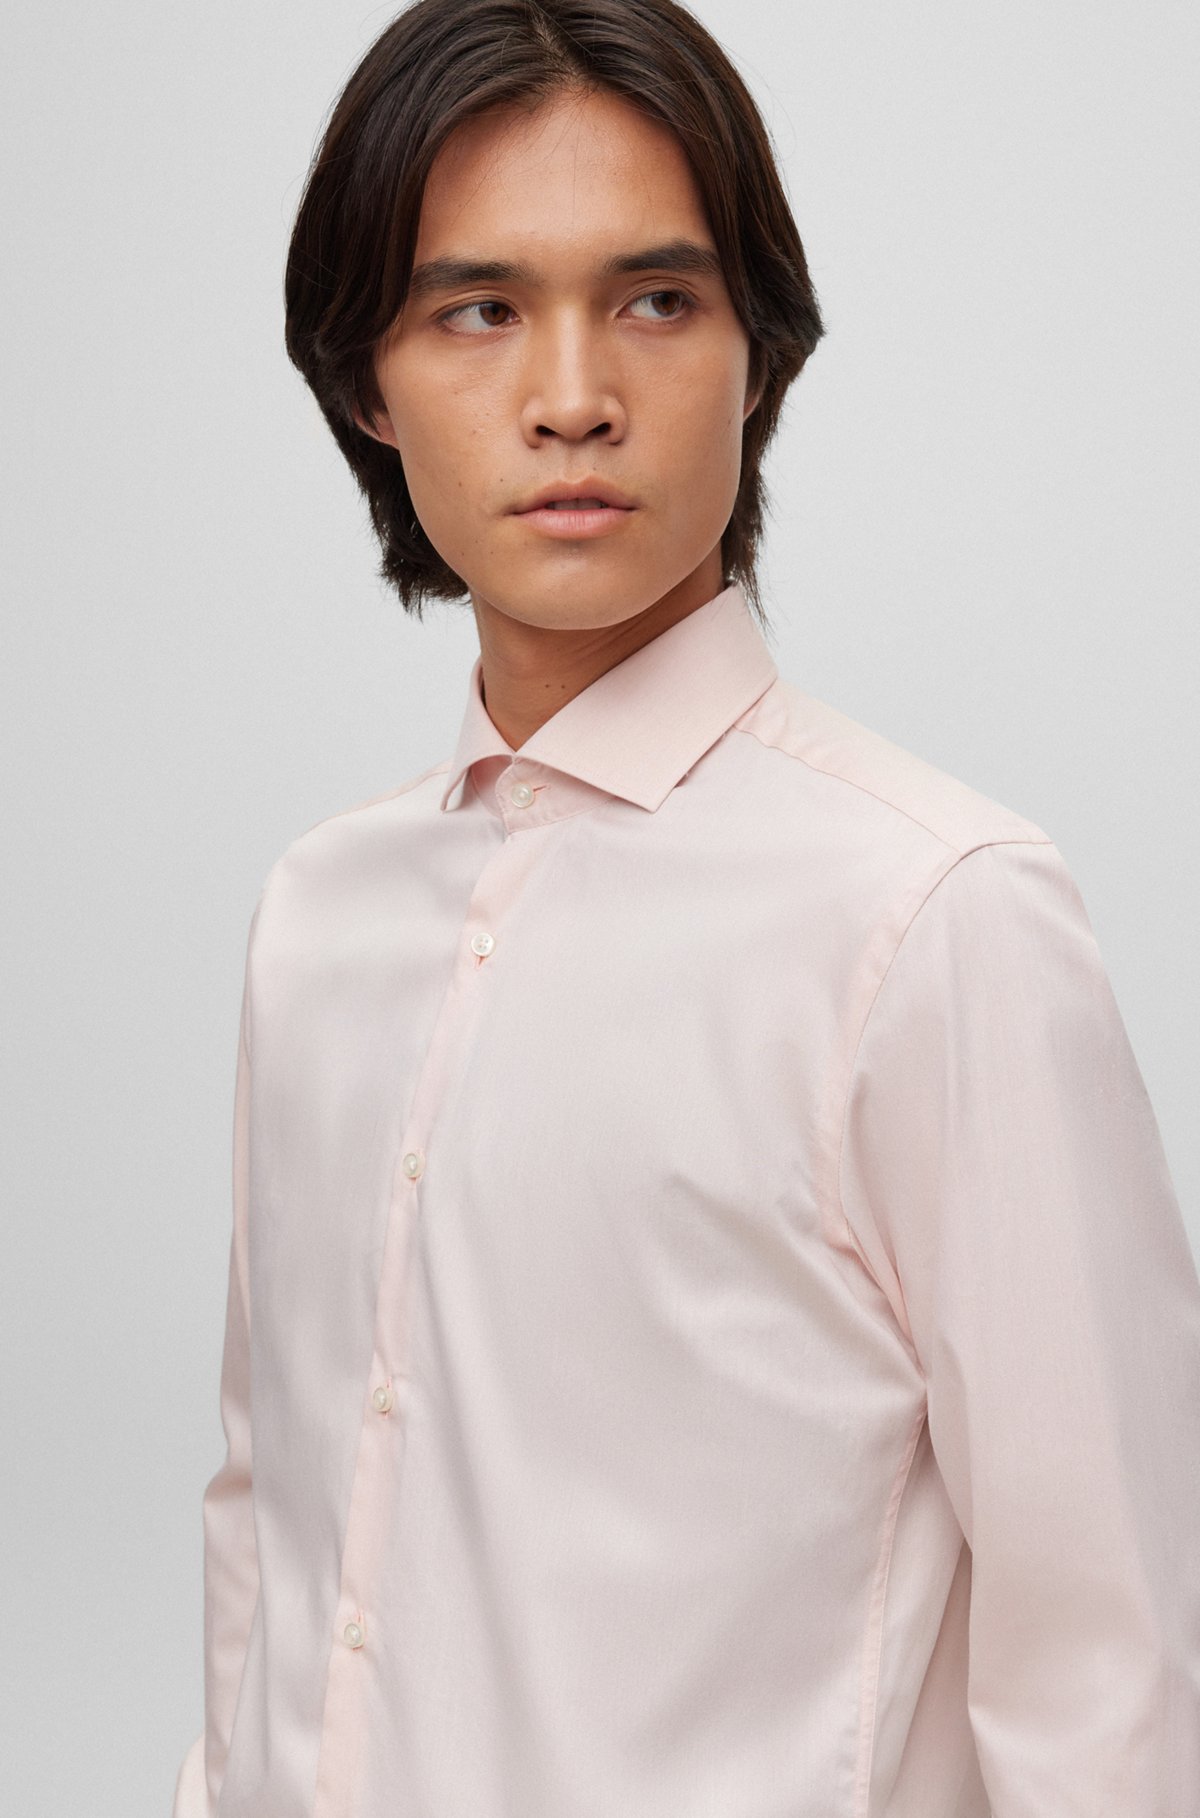 Slim-fit shirt in easy-iron cotton twill, light pink